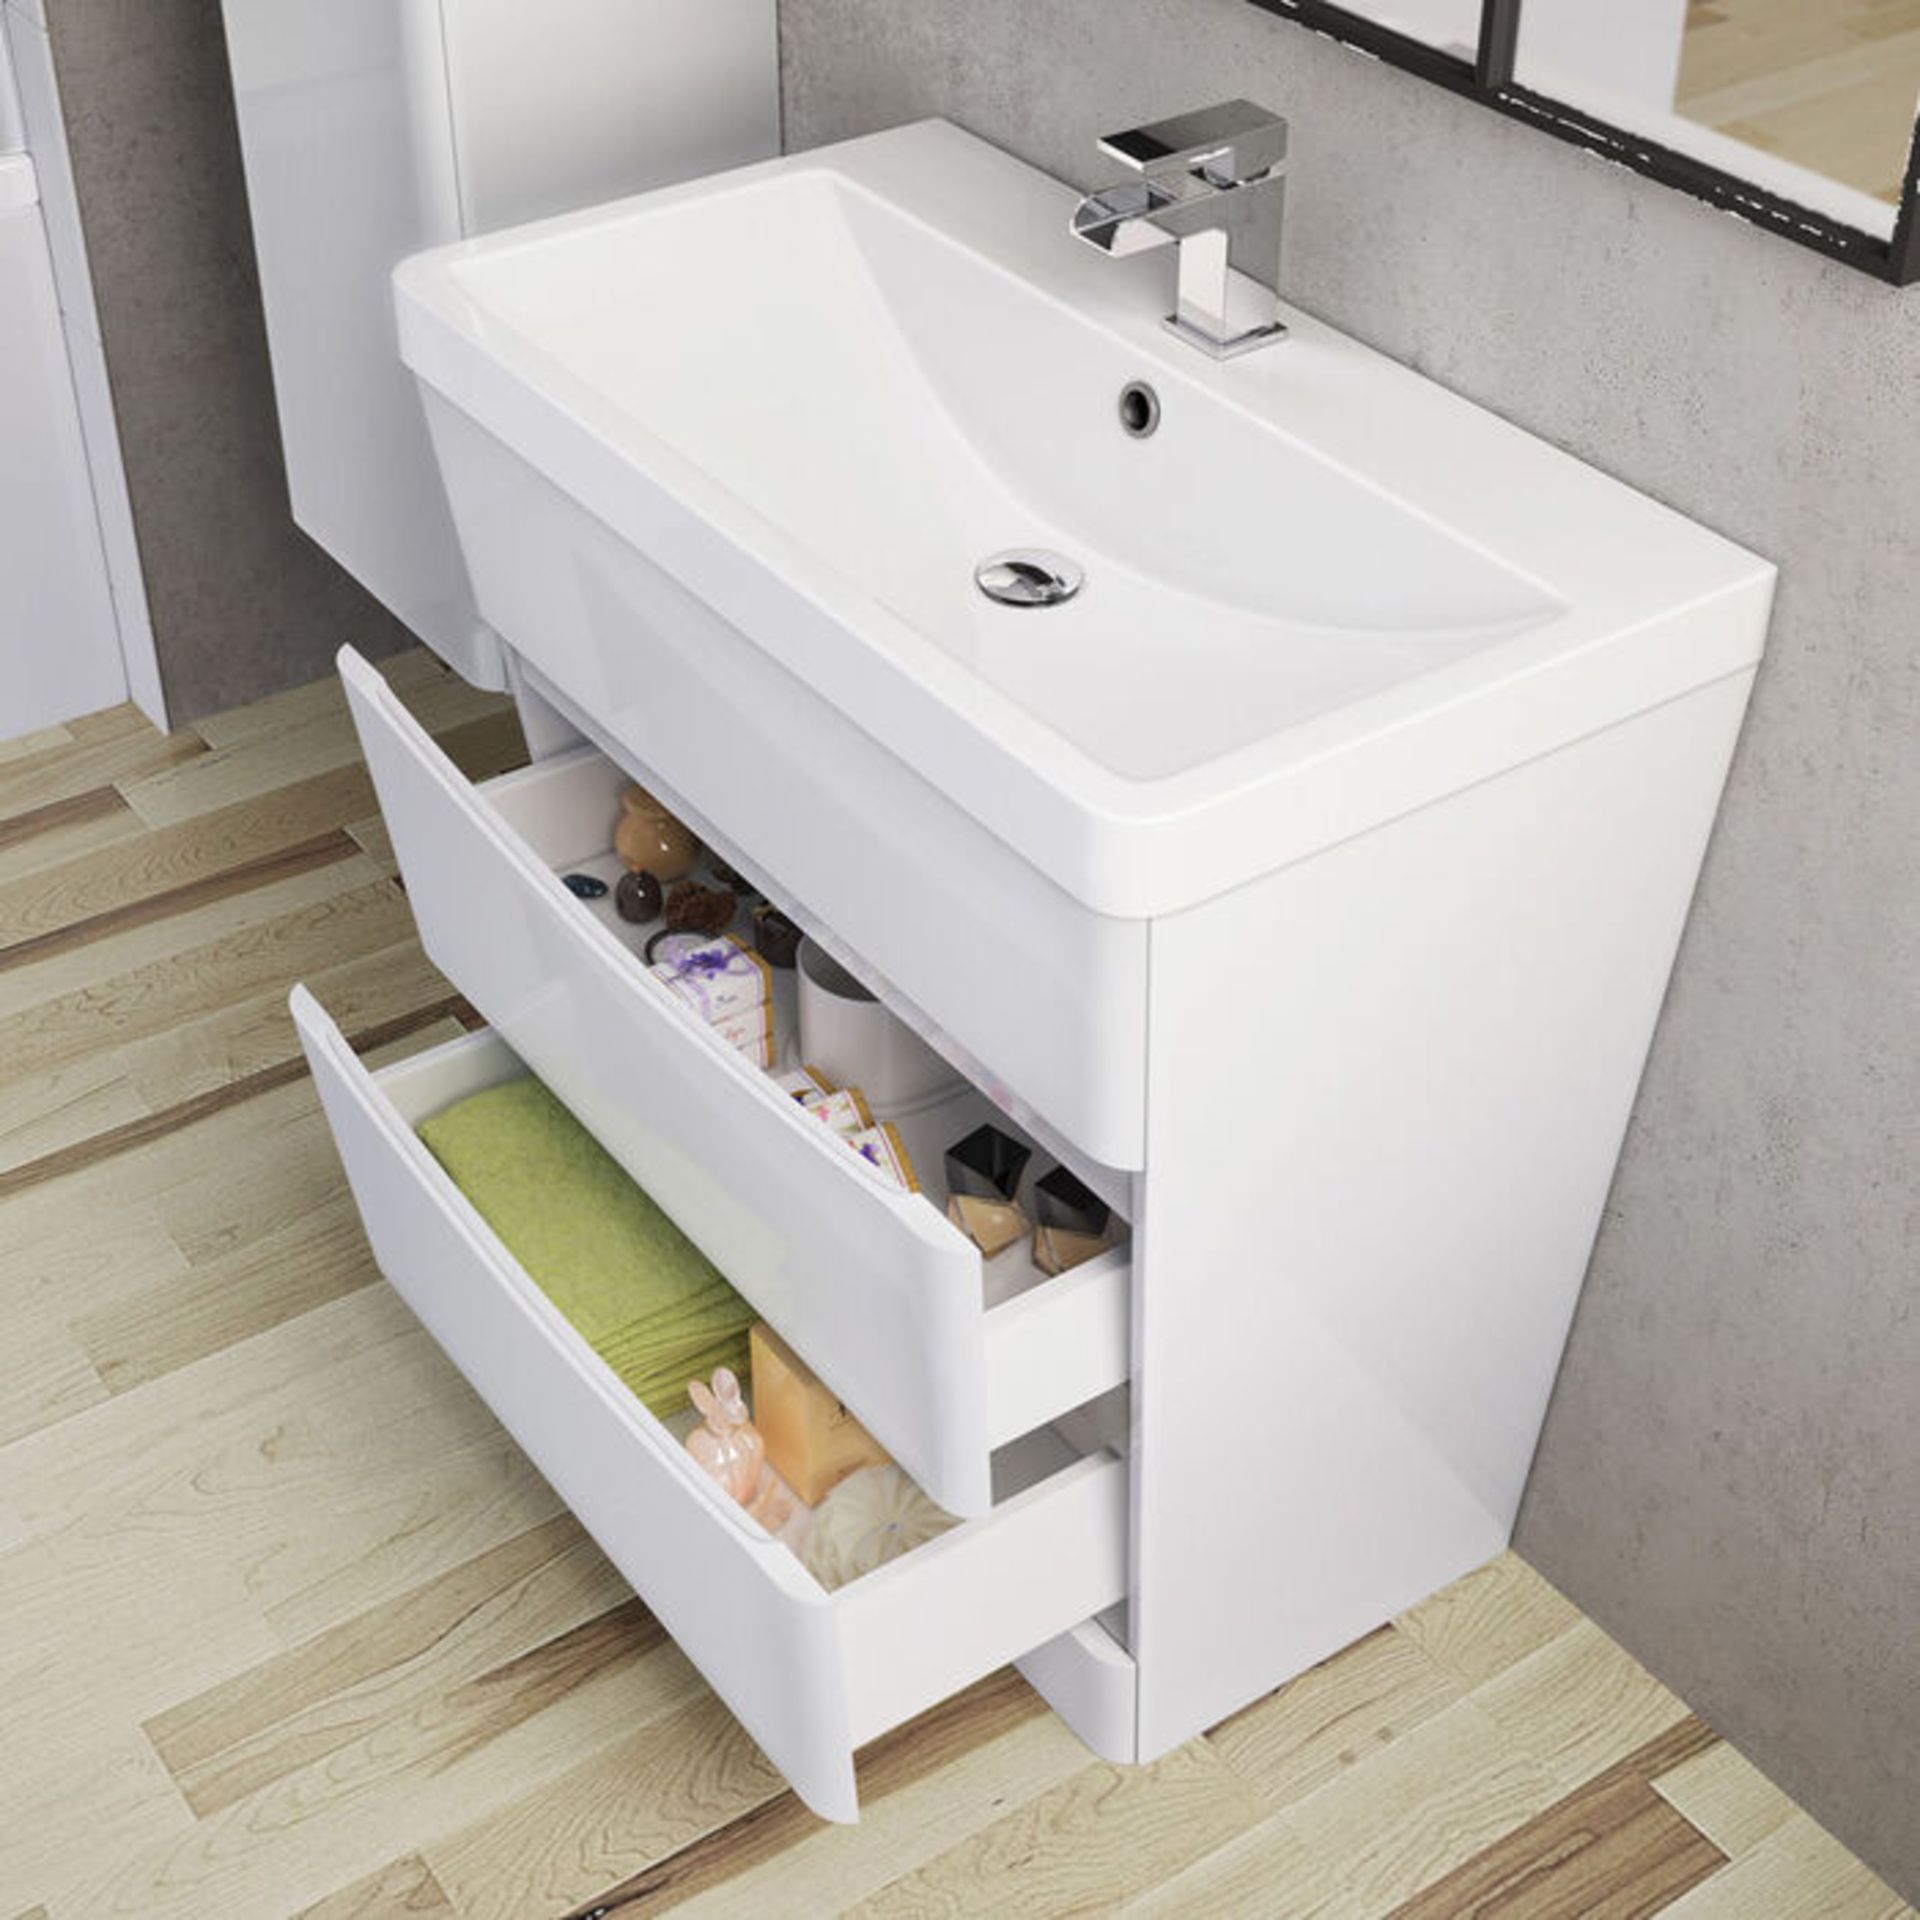 NEW & BOXED 800mm Austin II Gloss White Sink Drawer Unit - Floor Standing. MF2431.RRP £849.99... - Image 2 of 3